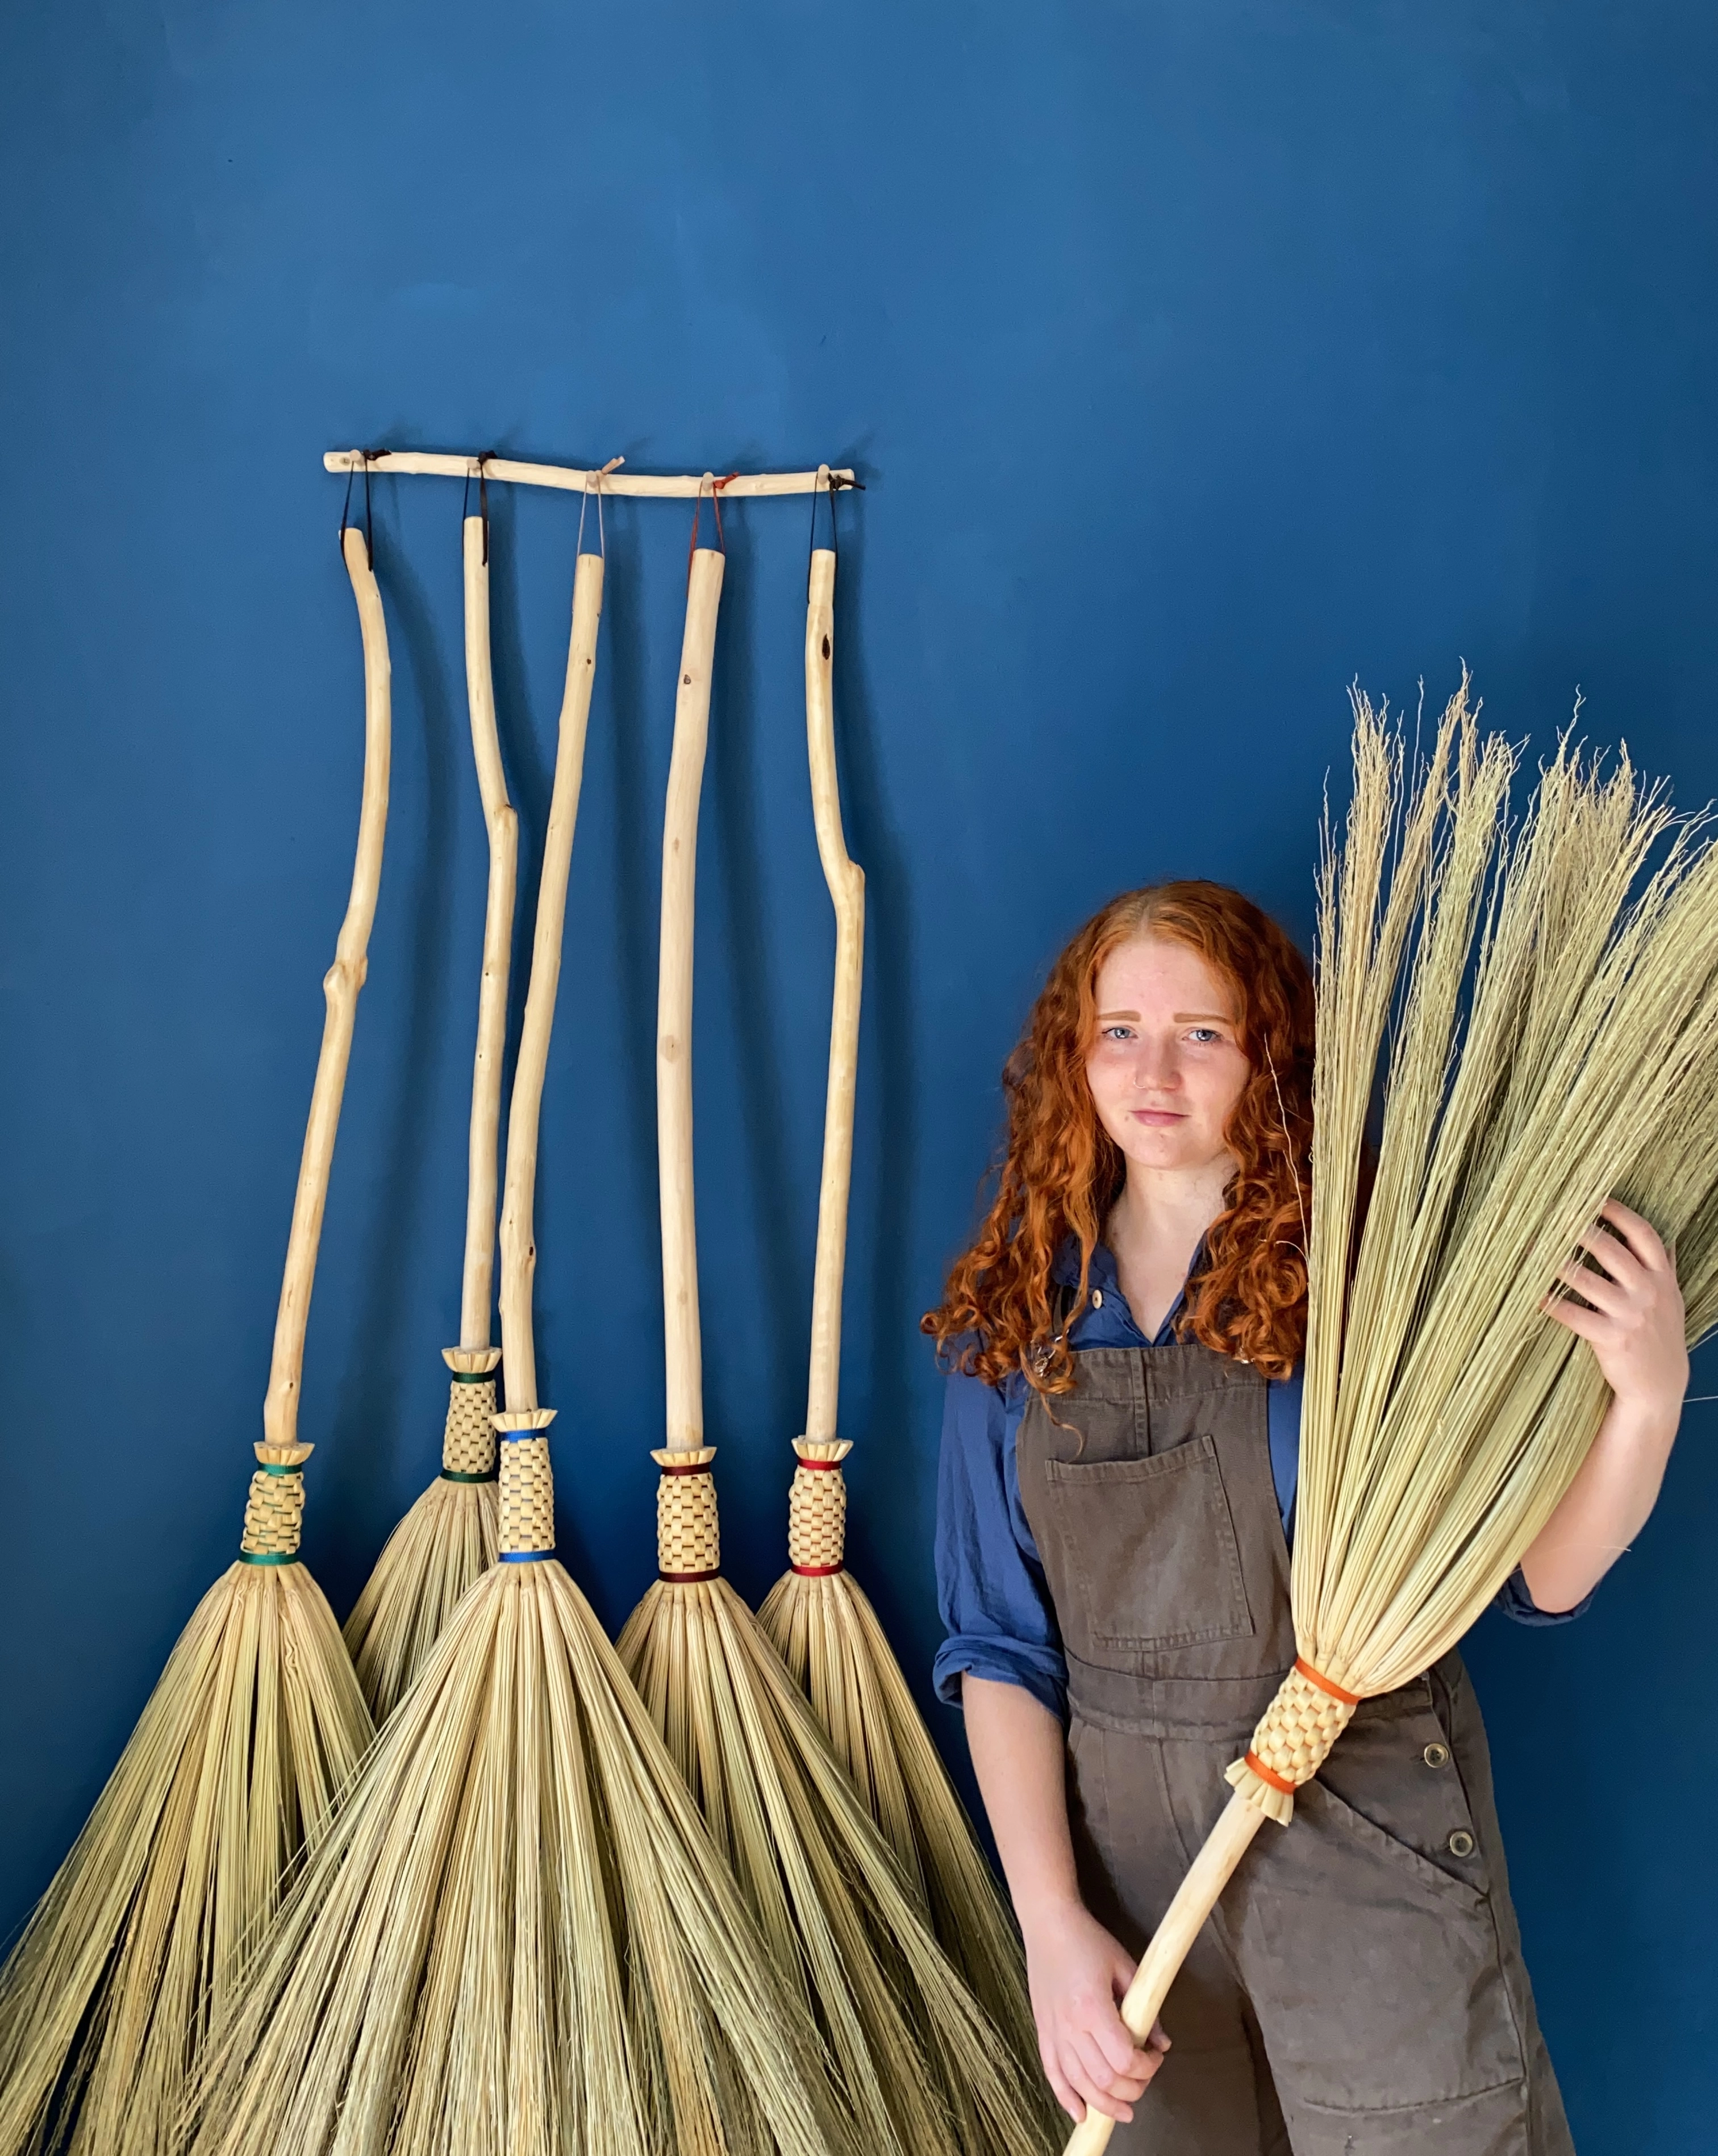 Rosa Harradine with some unfinished brooms